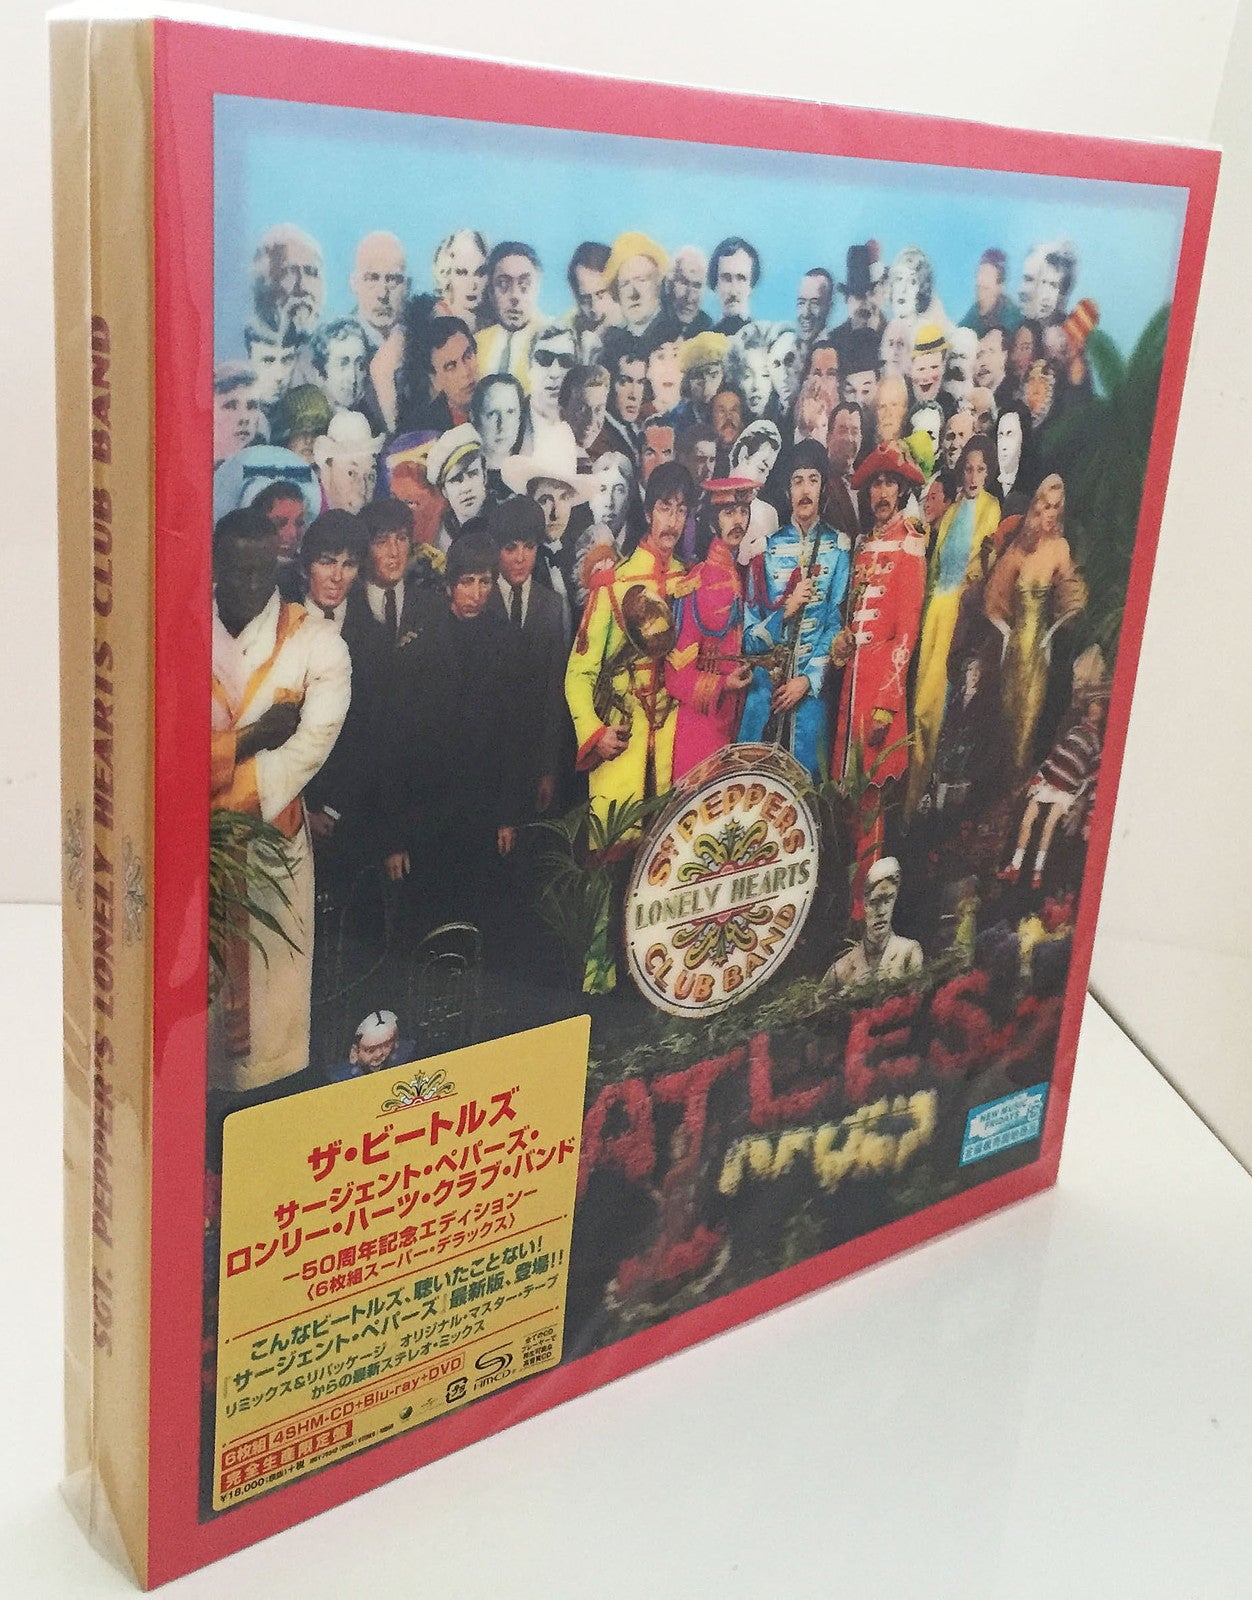 The Beatles - Sgt. Pepper'S Lonely Hearts Club Band - Japan  4 SHM-CD+Blu-ray+DVD Limited Edition